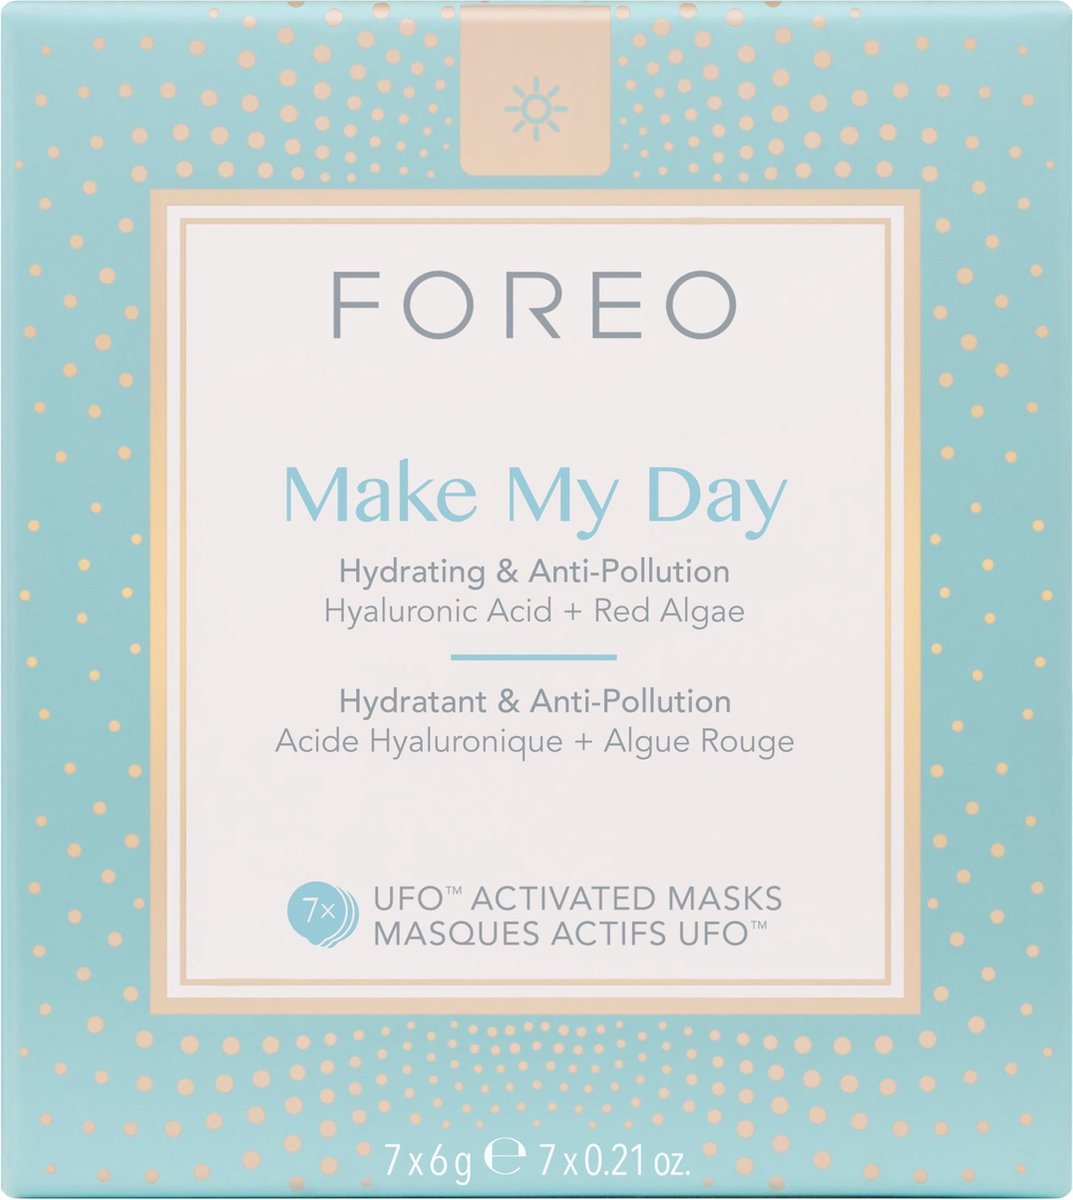 FOREO – Make my Day for UFO™ Face Mask - FOREO